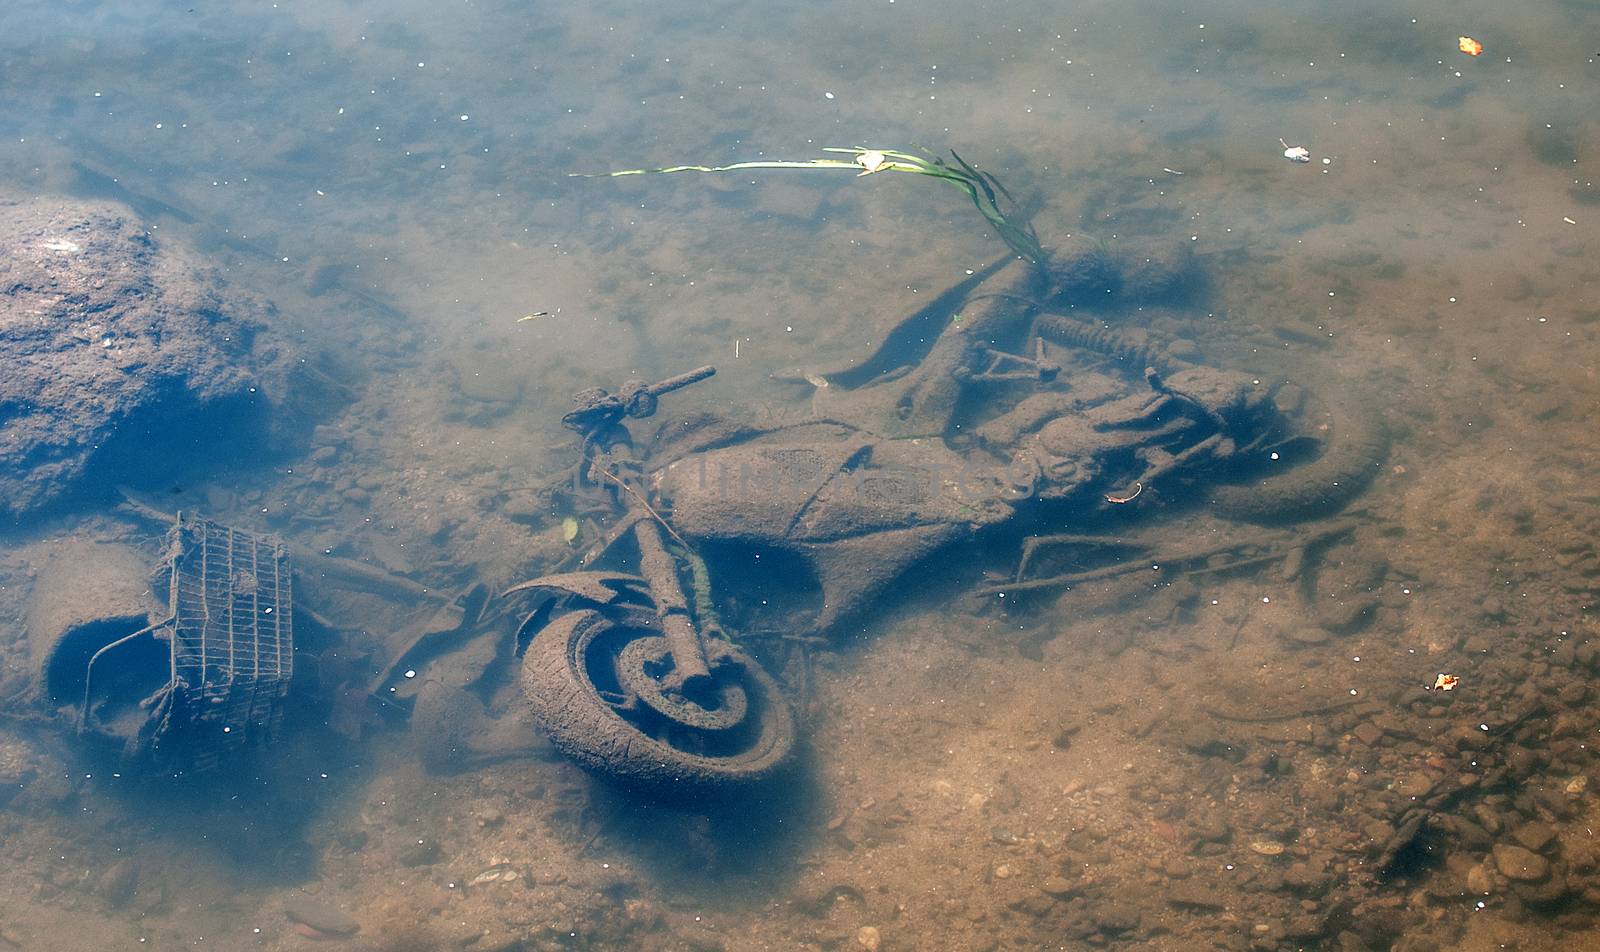 abandoned motor bike in the river avon in bath england by sirspread